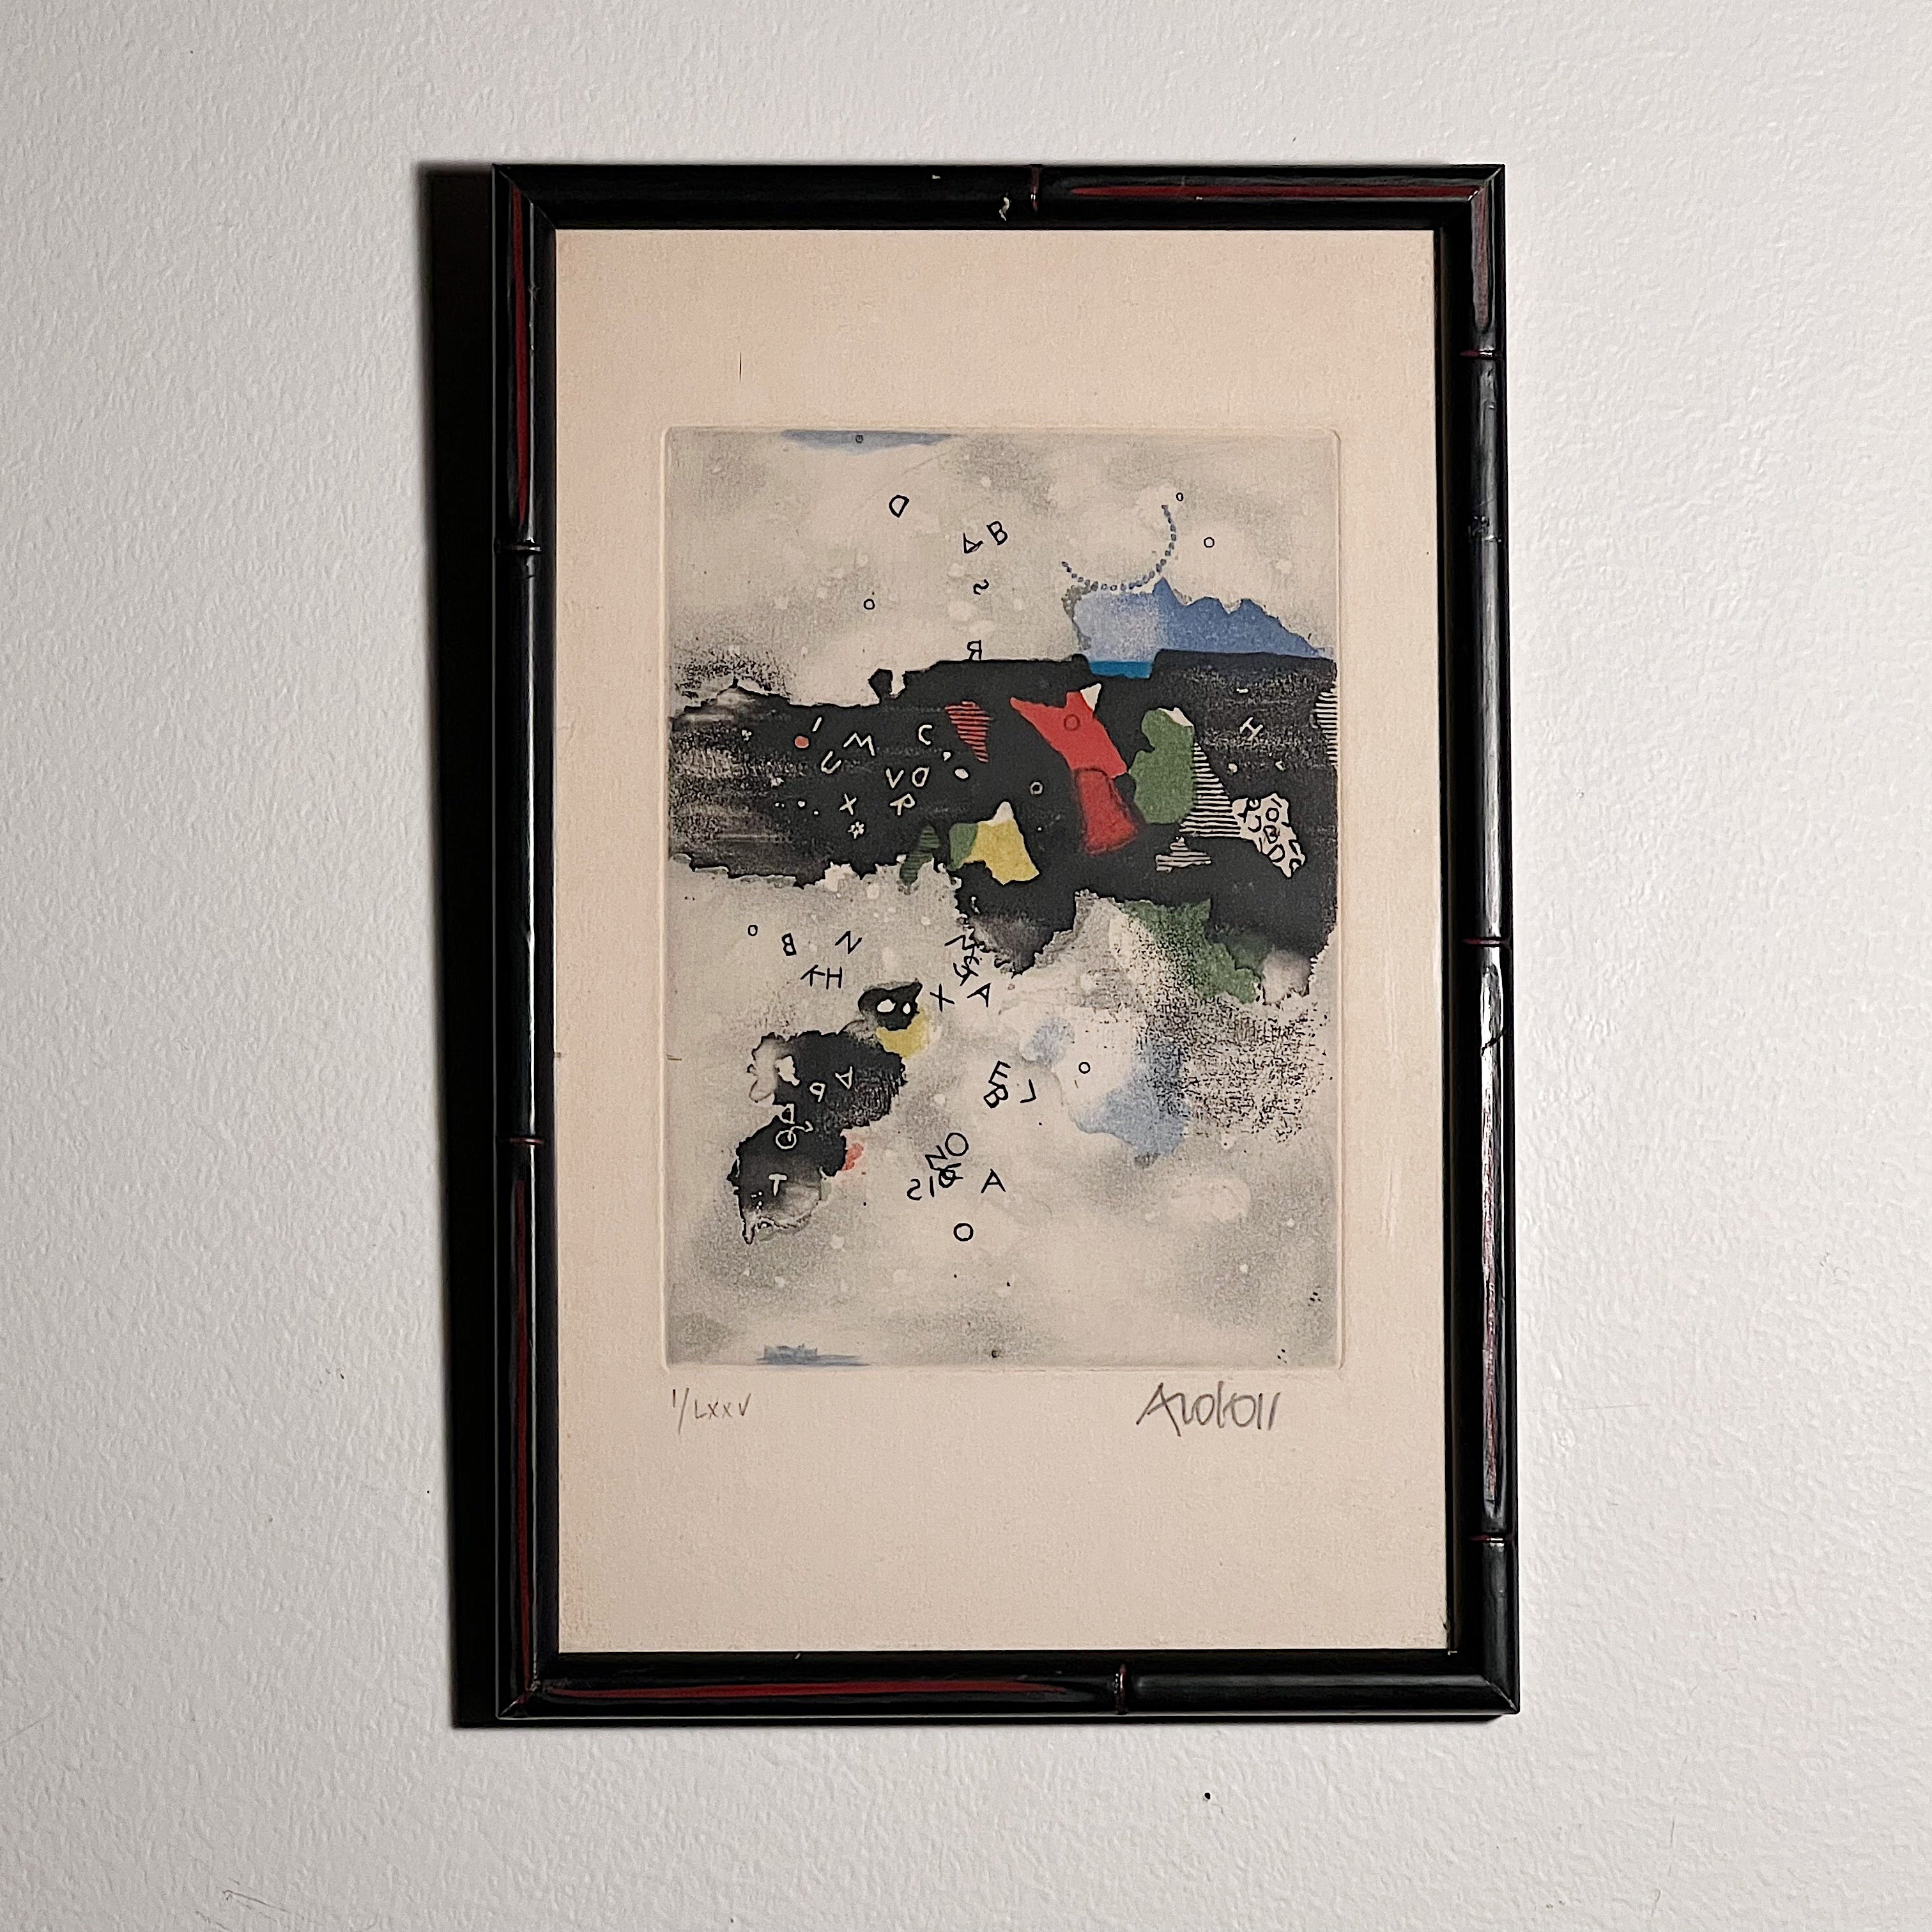 Rare Mordecai Ardon Color Etching of Falling Letters - Listed Israeli Artist - 1 of 75 -  Mysticism Print - Judaica Artwork - Limited Rare